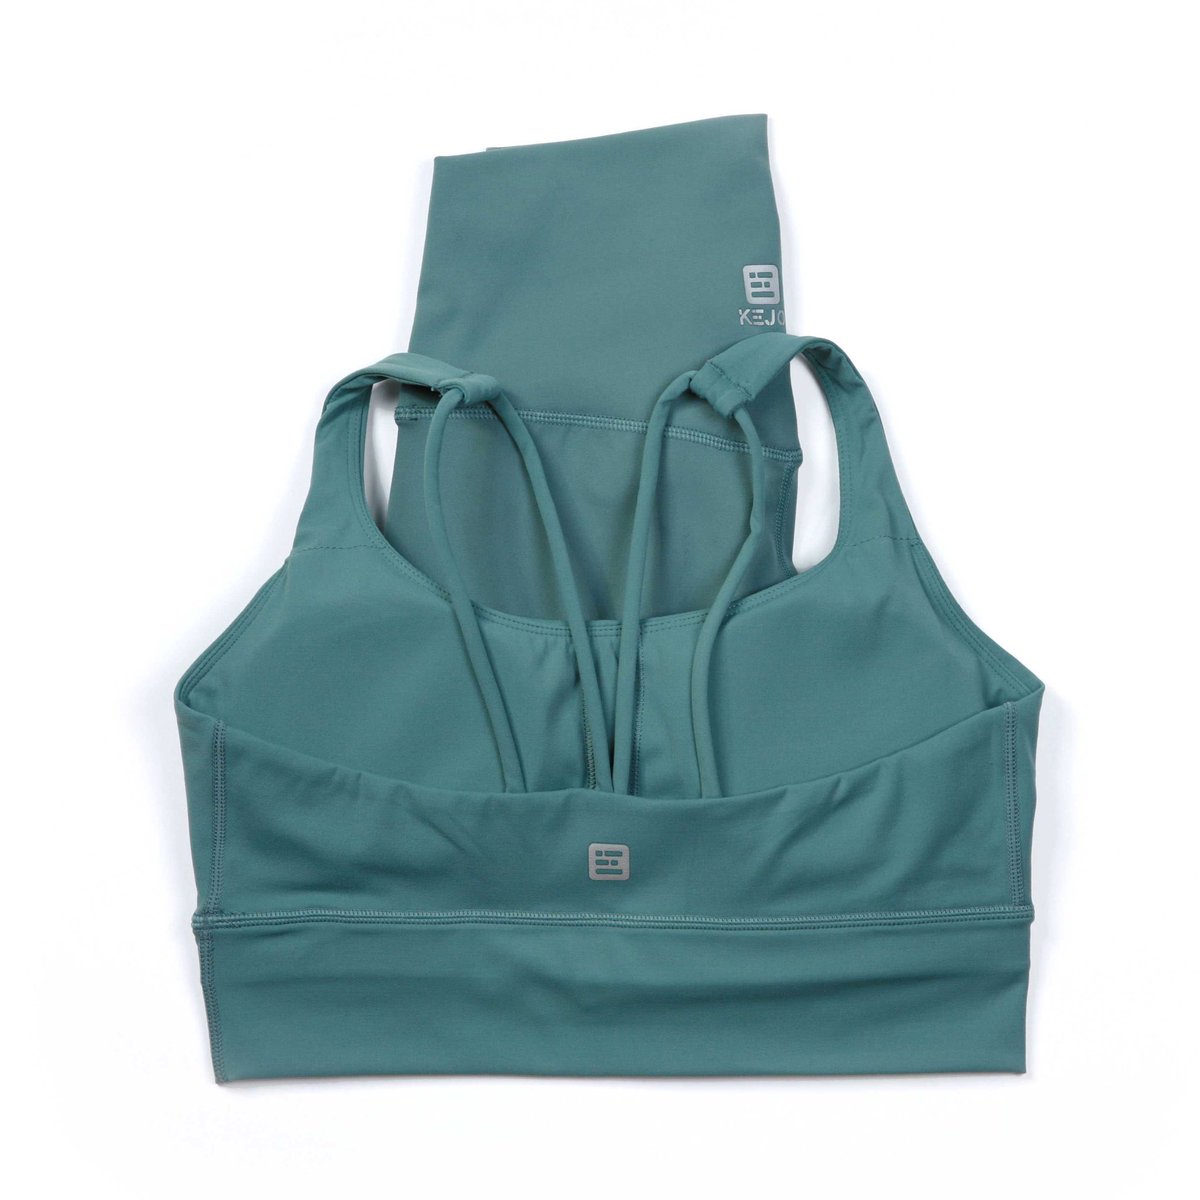 Ohhhh this colour! Gorgeous Soft Teal #gymgirl #ukfit #leggings #shoponline #freedelivery